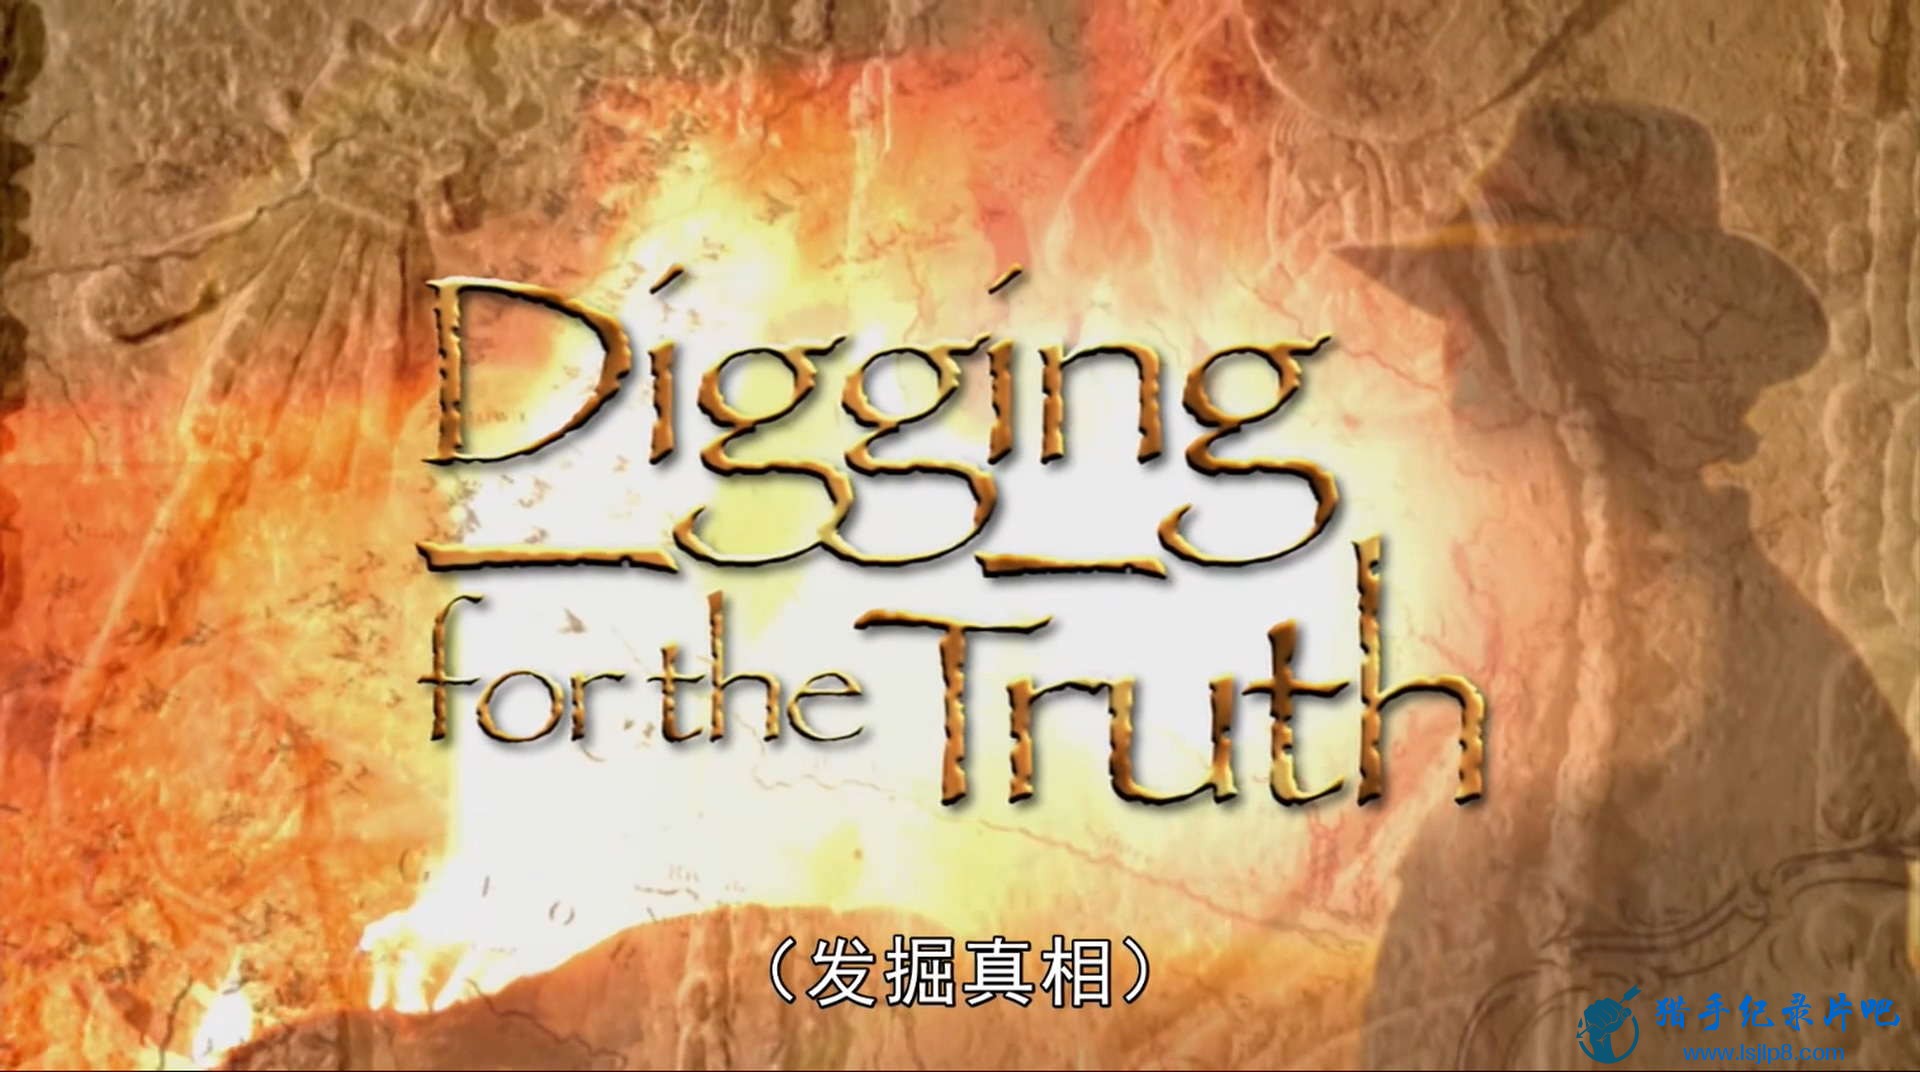 Digging.For.The.Truth.E01.WEB-DL.1080p.H264.AAC-HDCTV.mp4_20200613_112525.203_ͼ.jpg